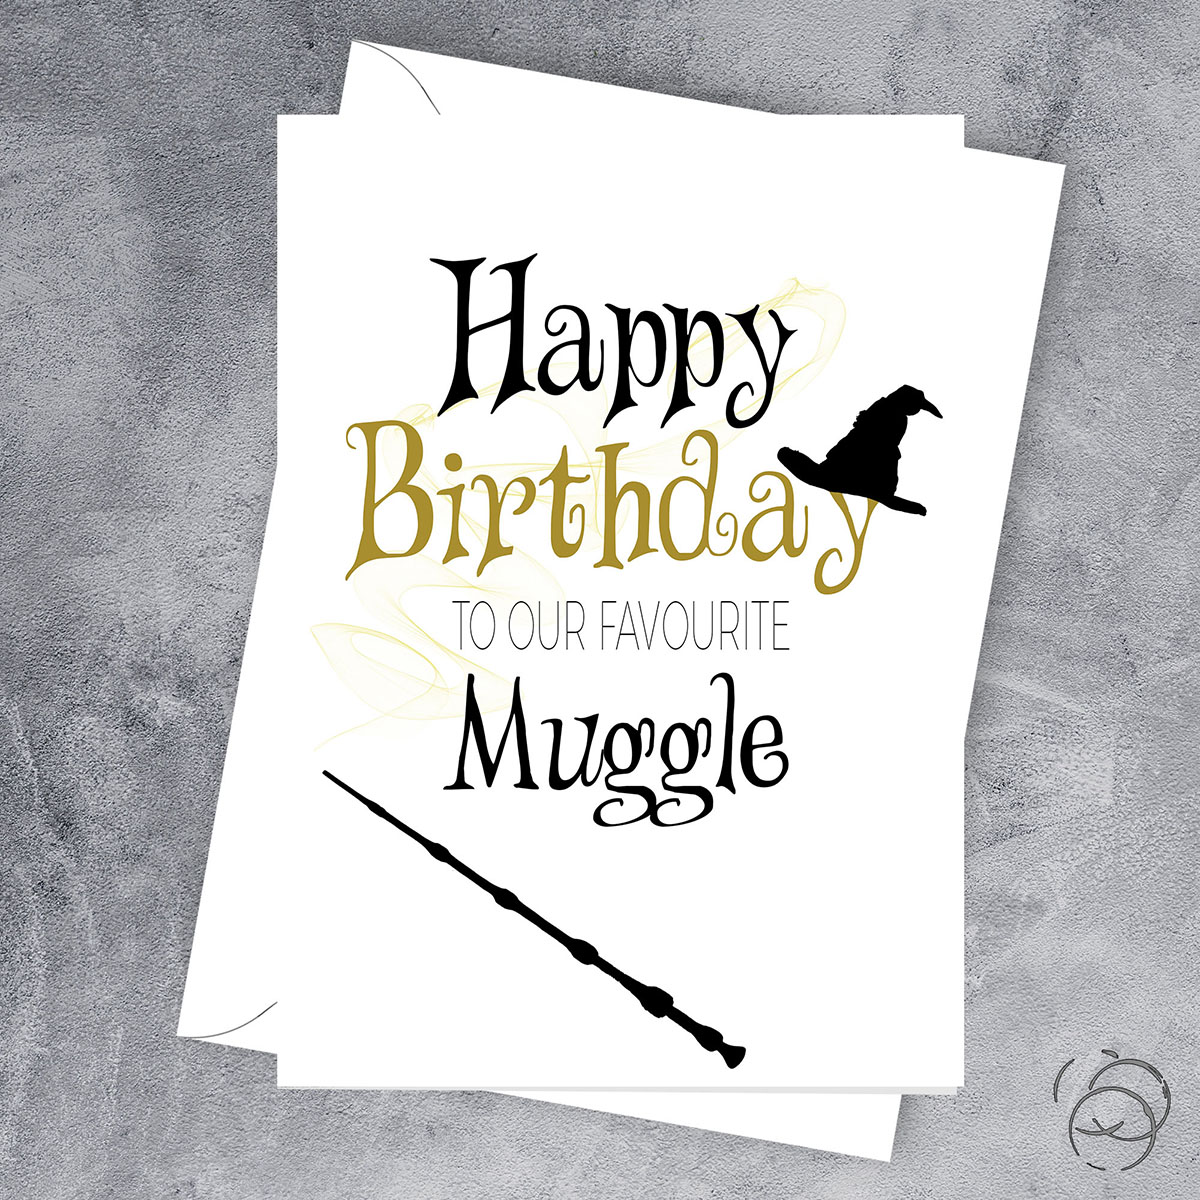 Harry Potter To Our Favourite Muggle Card - Pink Tag Prints